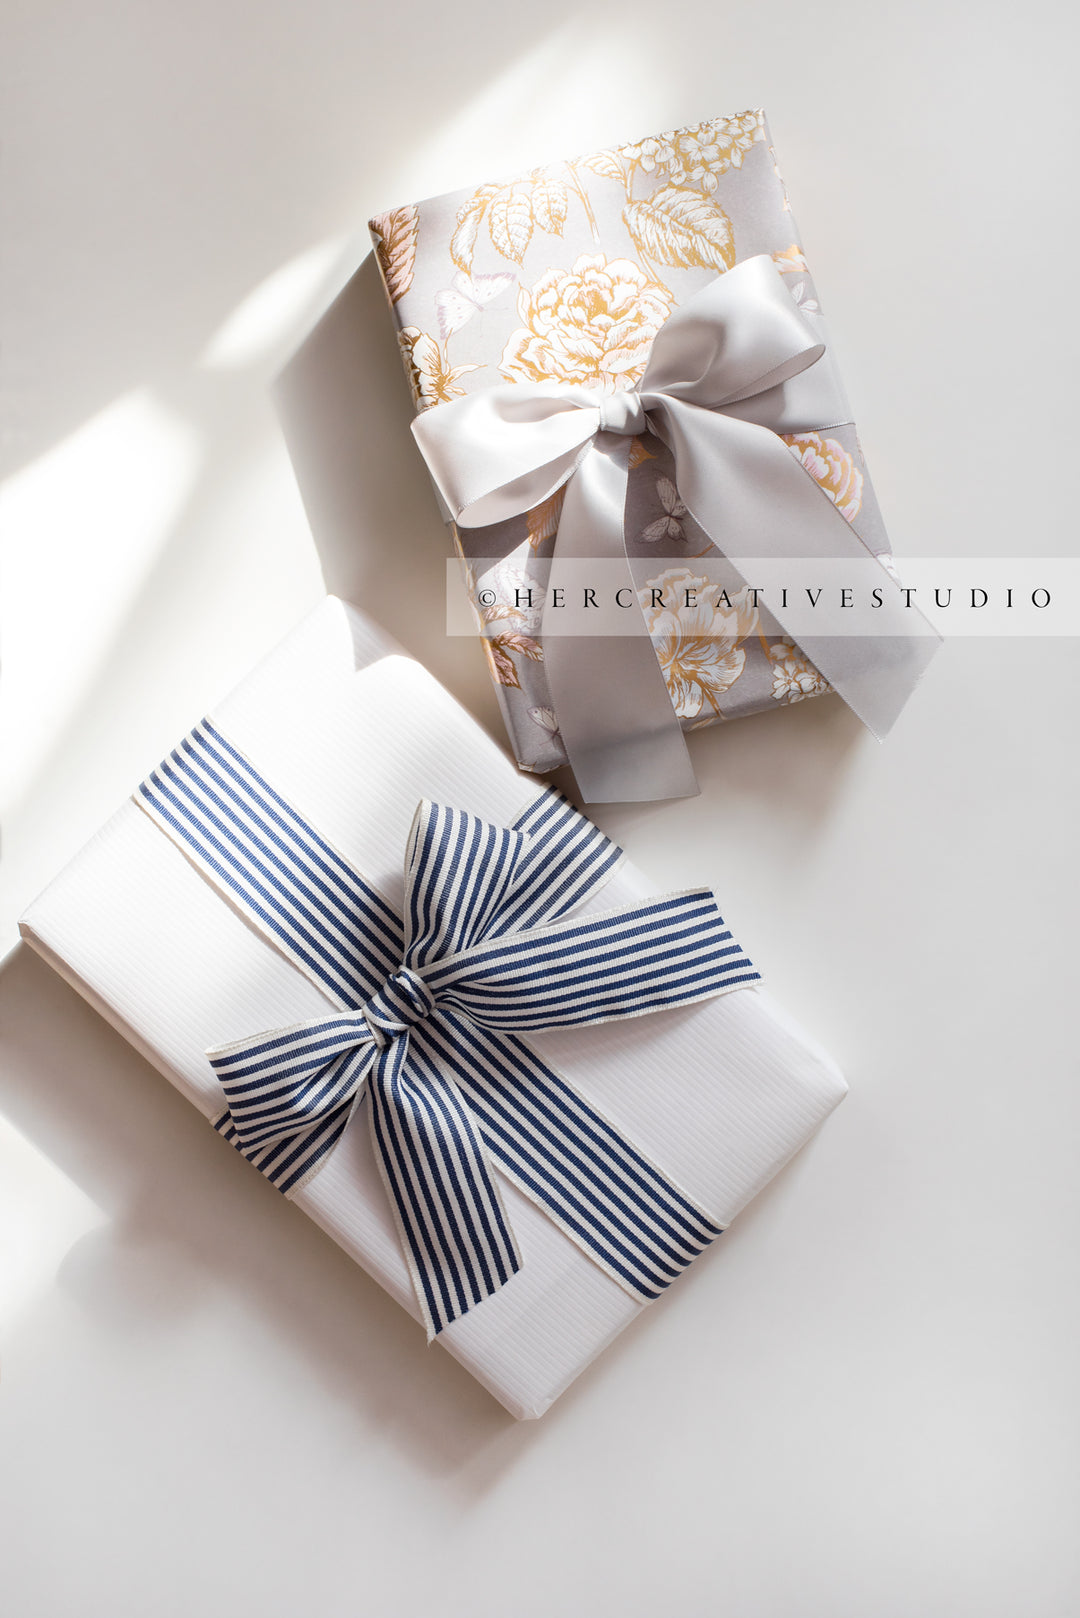 Gifts in Sunlight on White Background, Stock Image